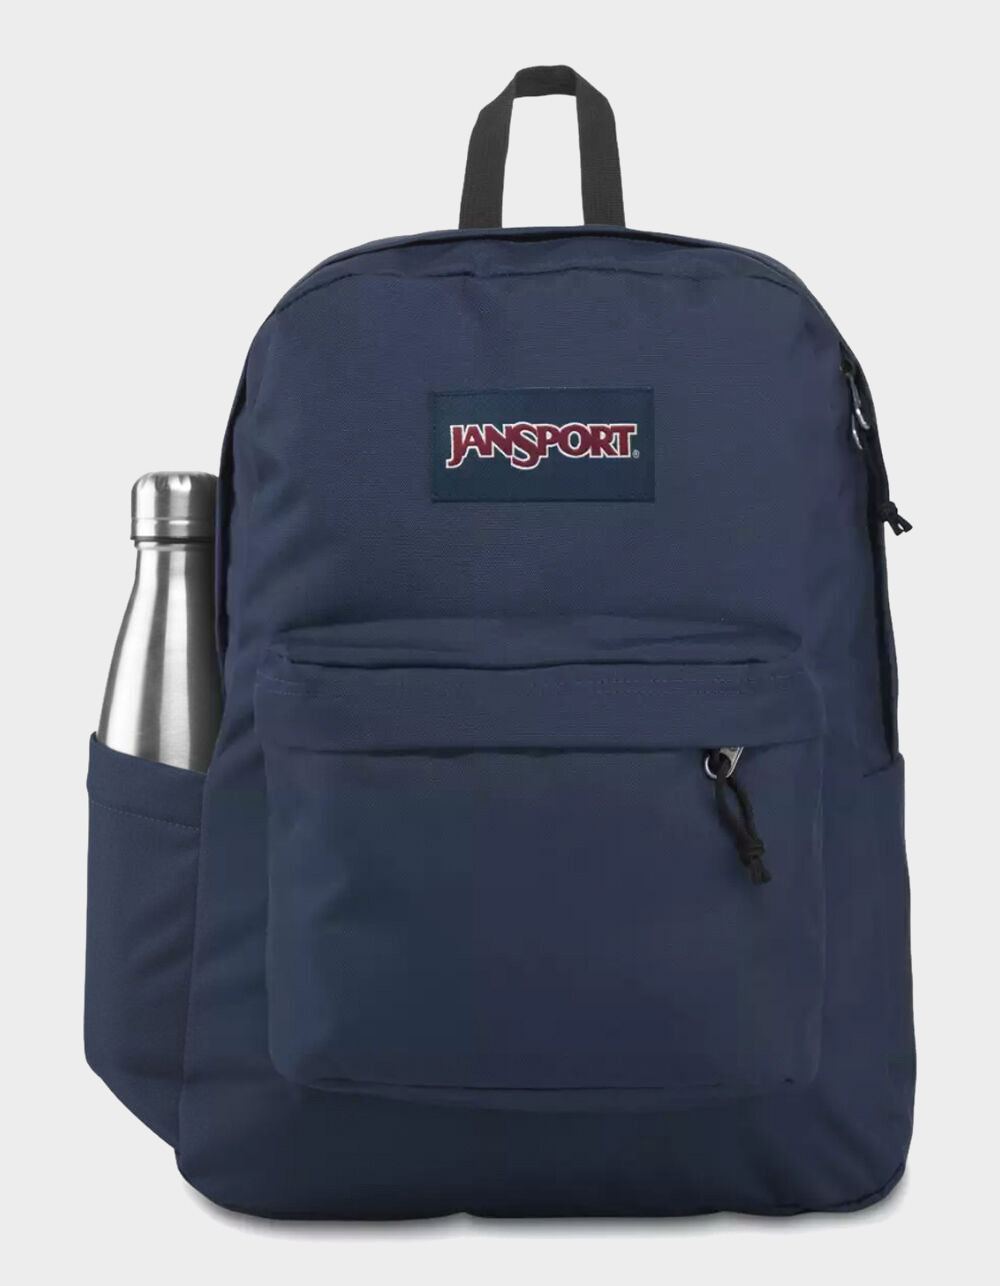 25 Cool Backpacks for Teens to Shop in 2023: Jansport, Adidas